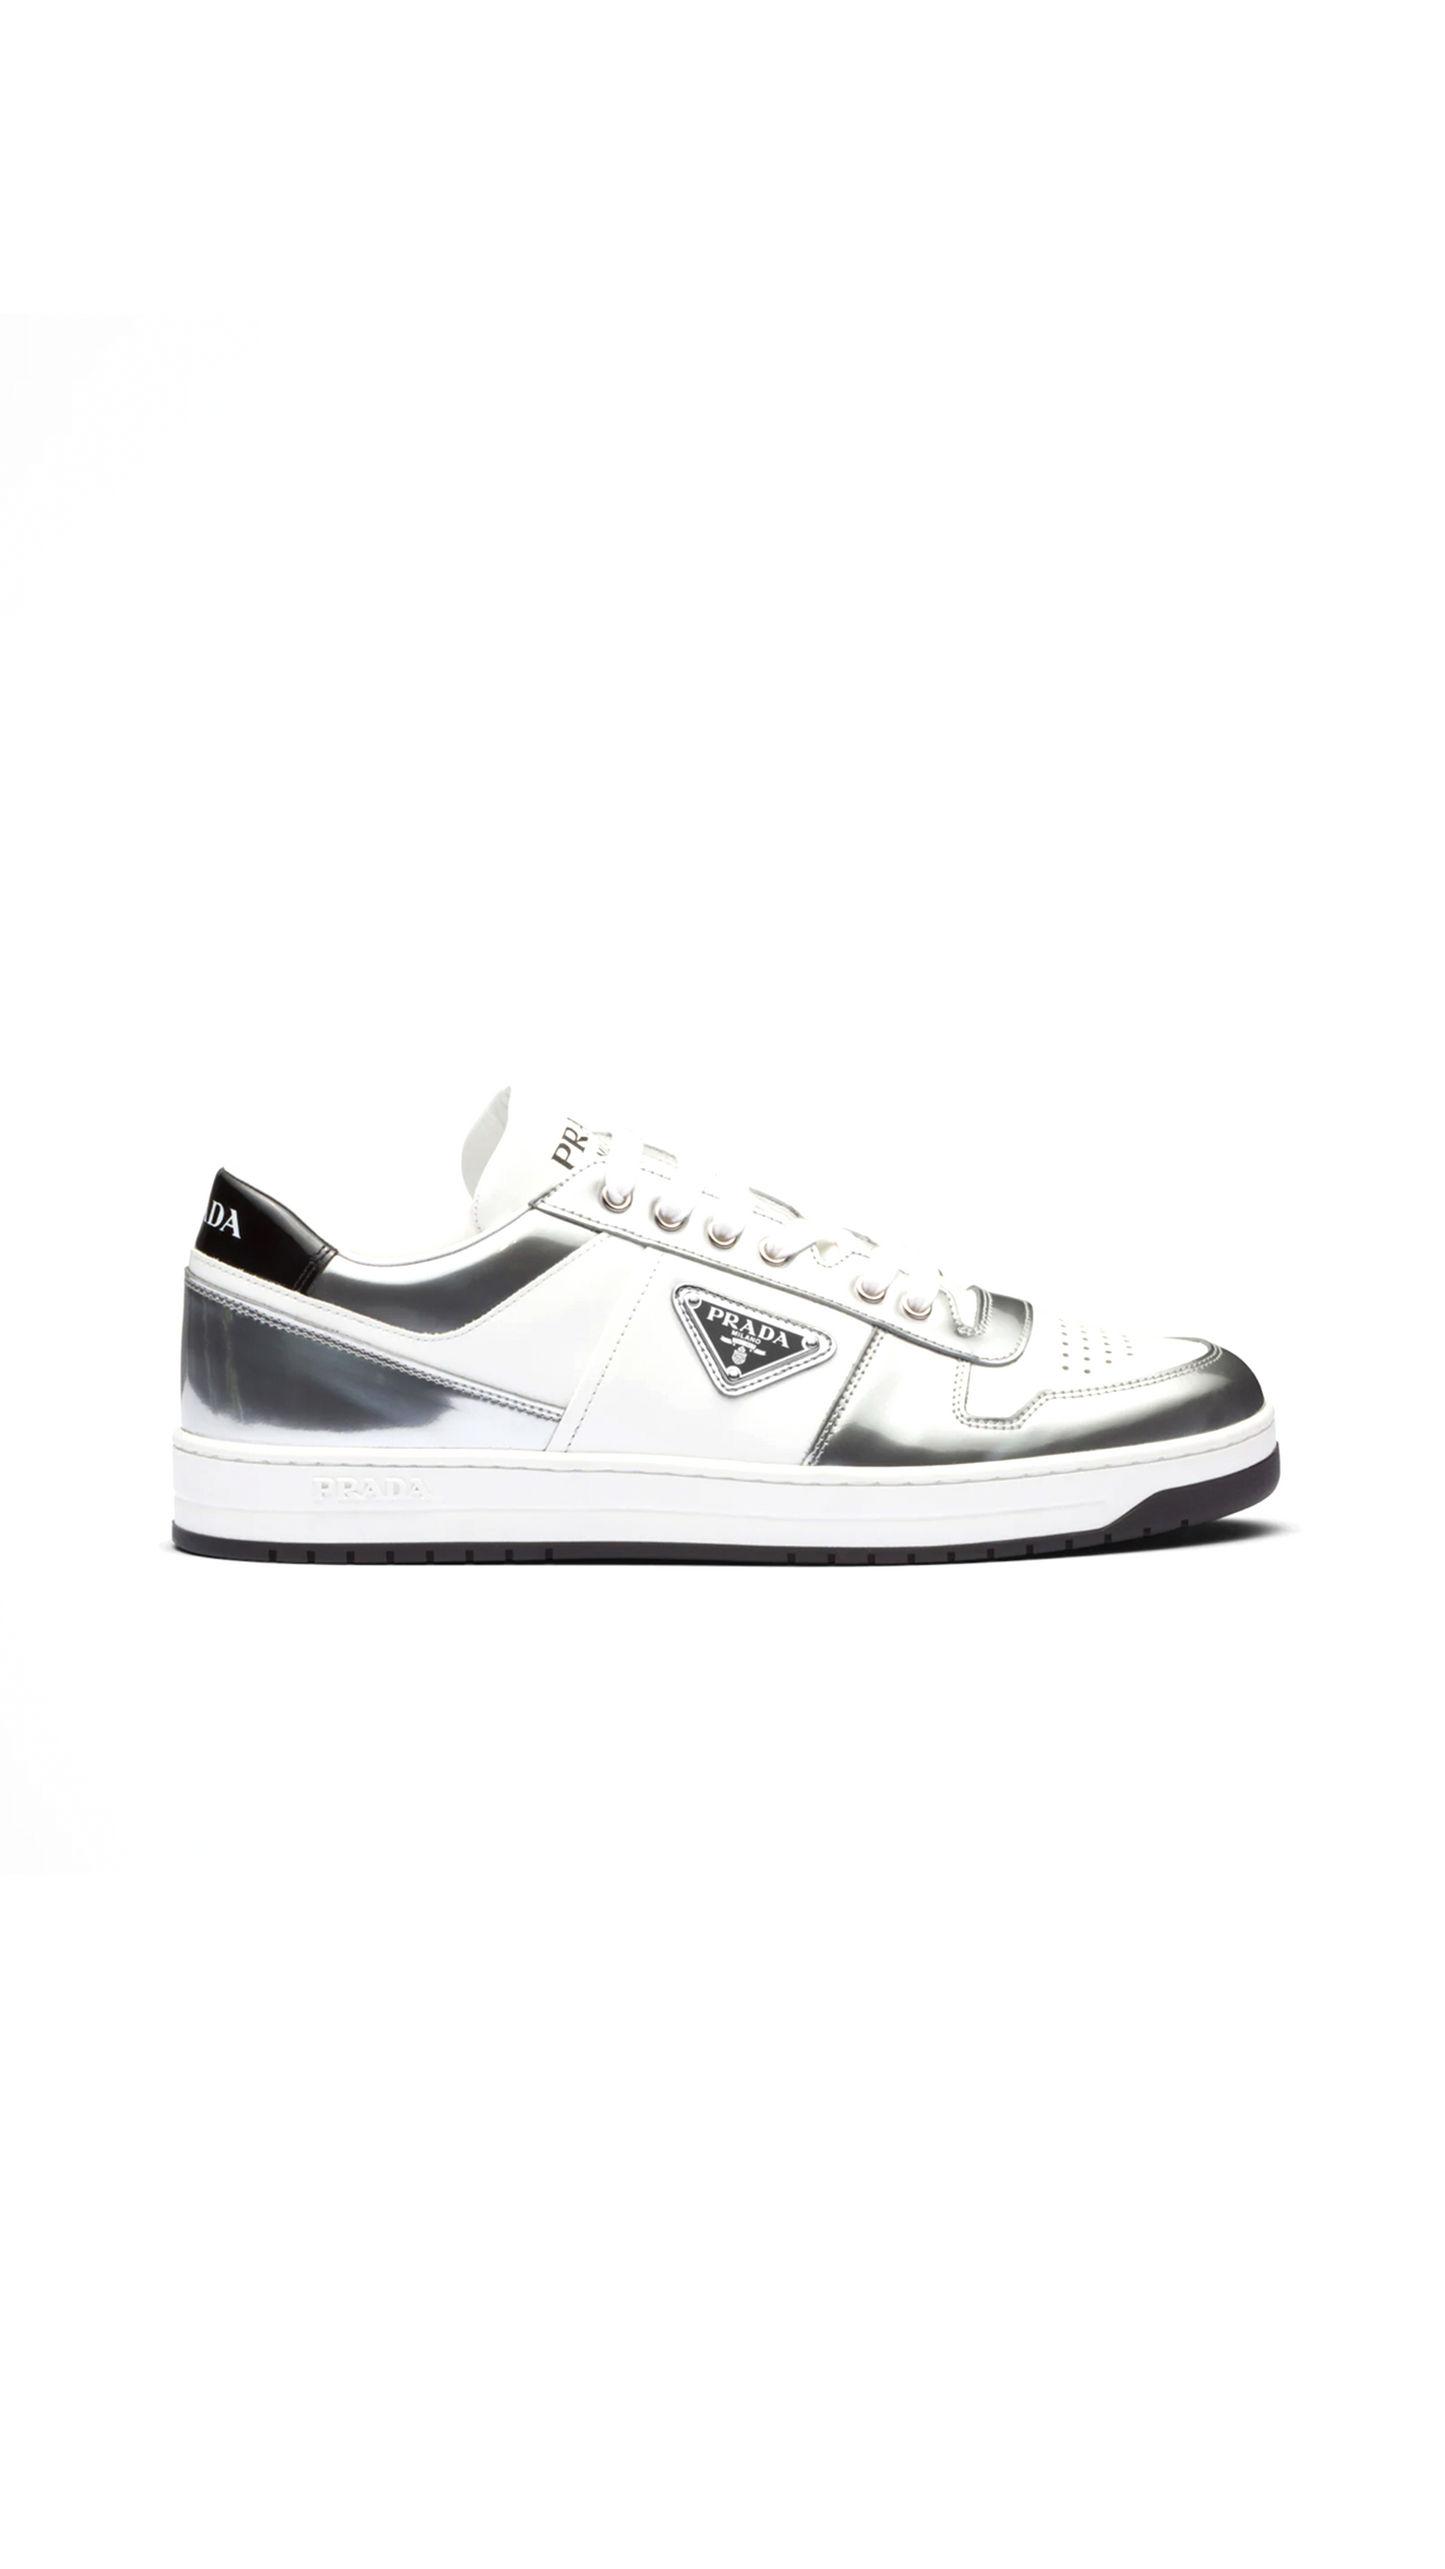 Downtown Leather Sneakers - Silver / White